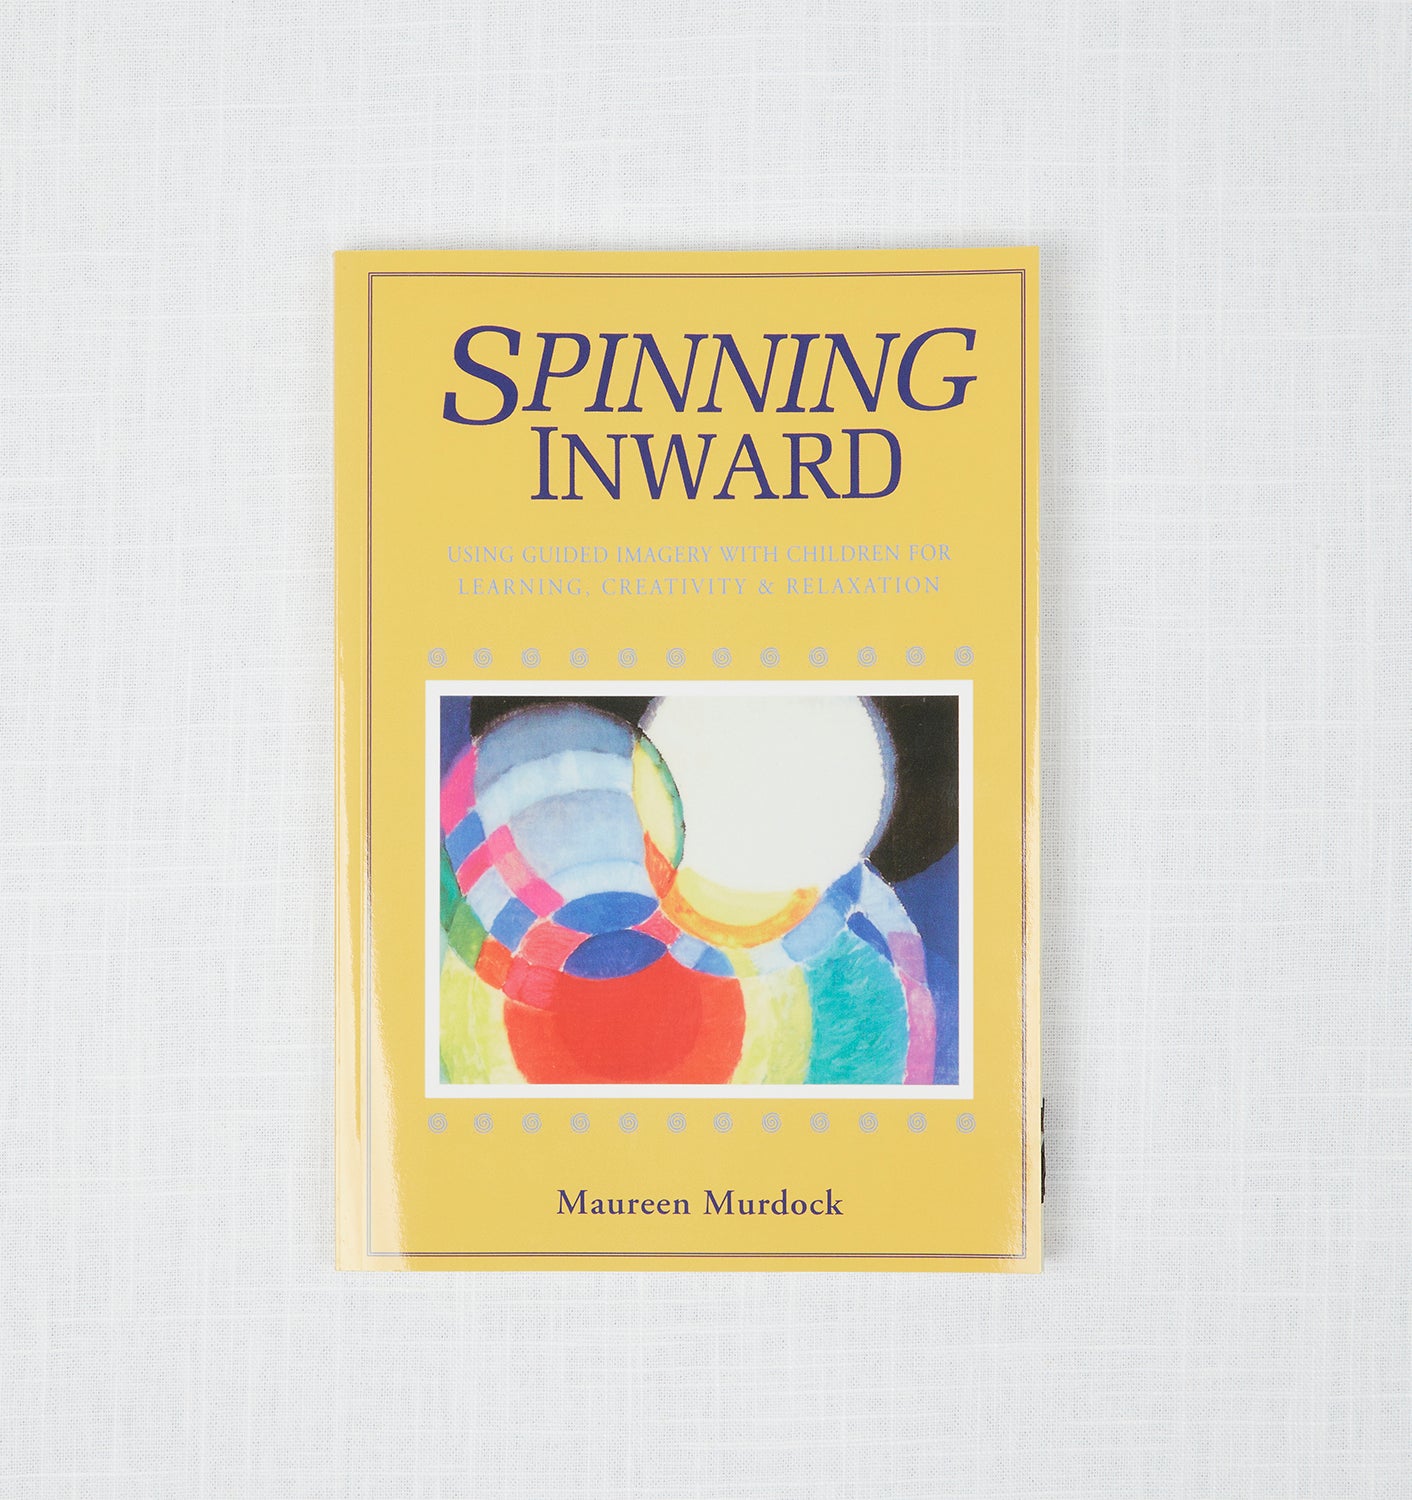 Spinning Inward: Using Guided Imagery with Children for Learning, Creativity & Relaxation